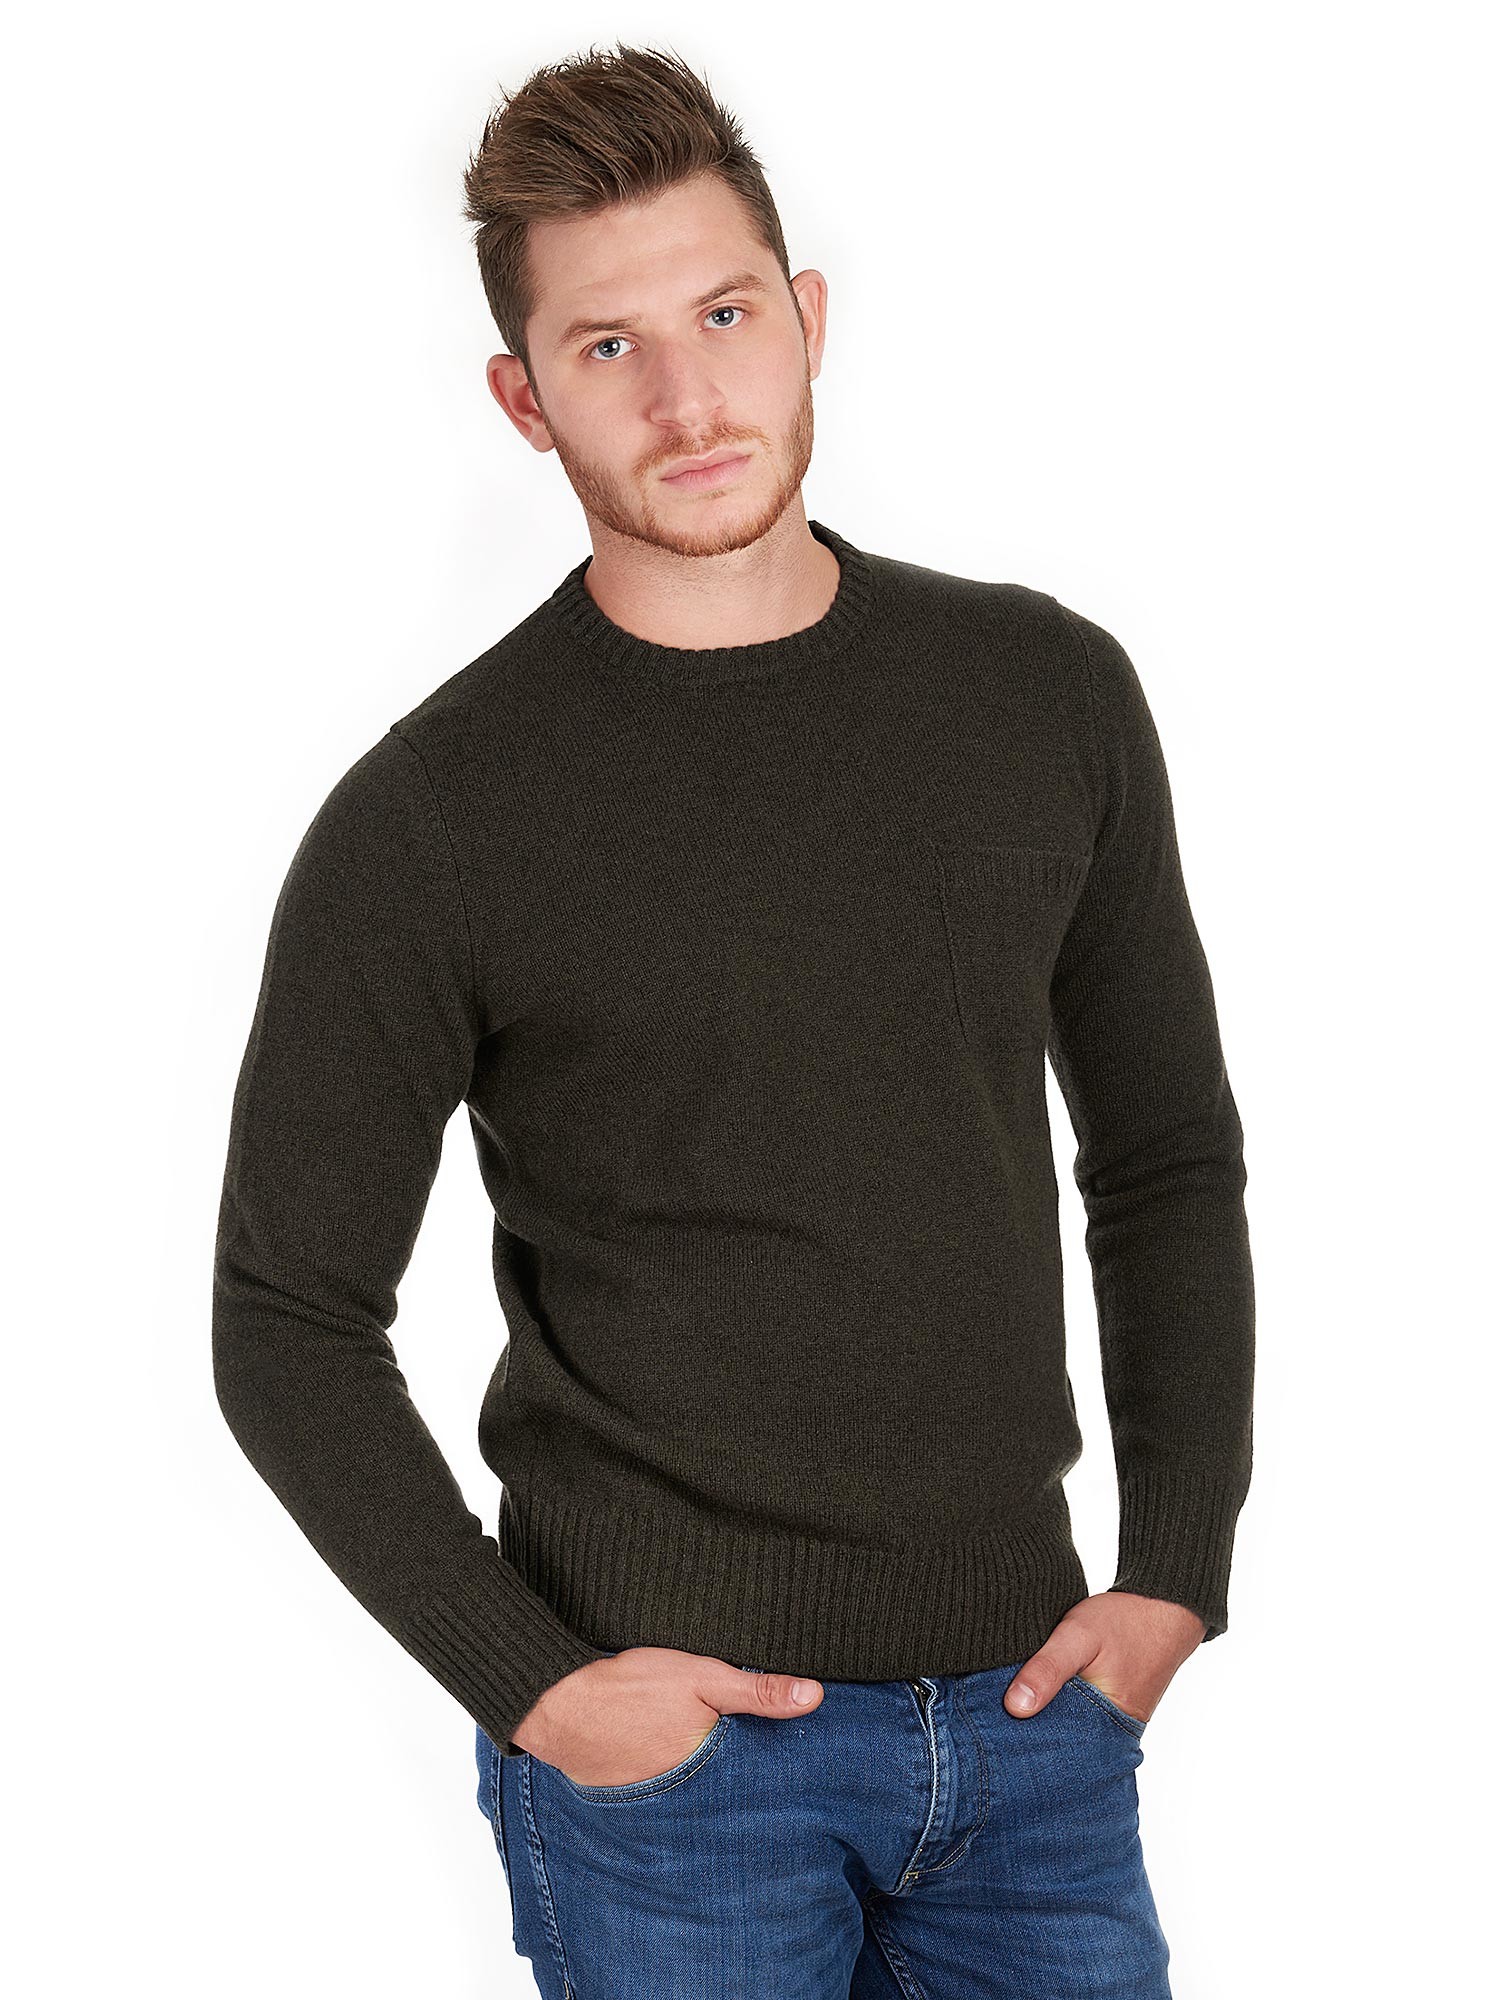 High quality wool sweater for men made in Italy Maurizio Pacini